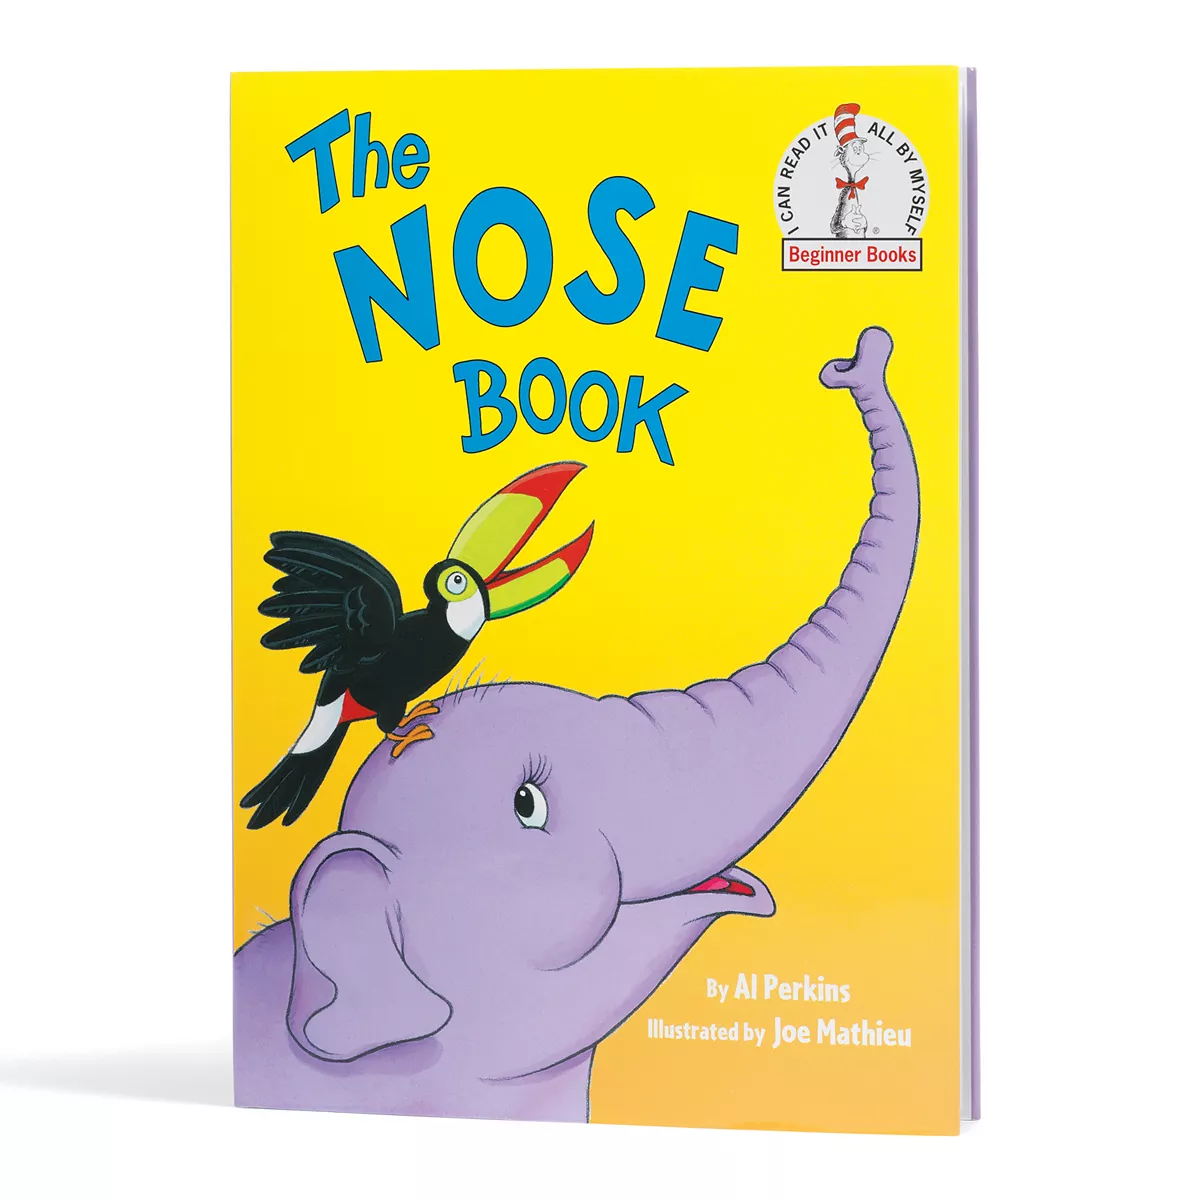 The Nose Book Kohls Care (Hardcover)